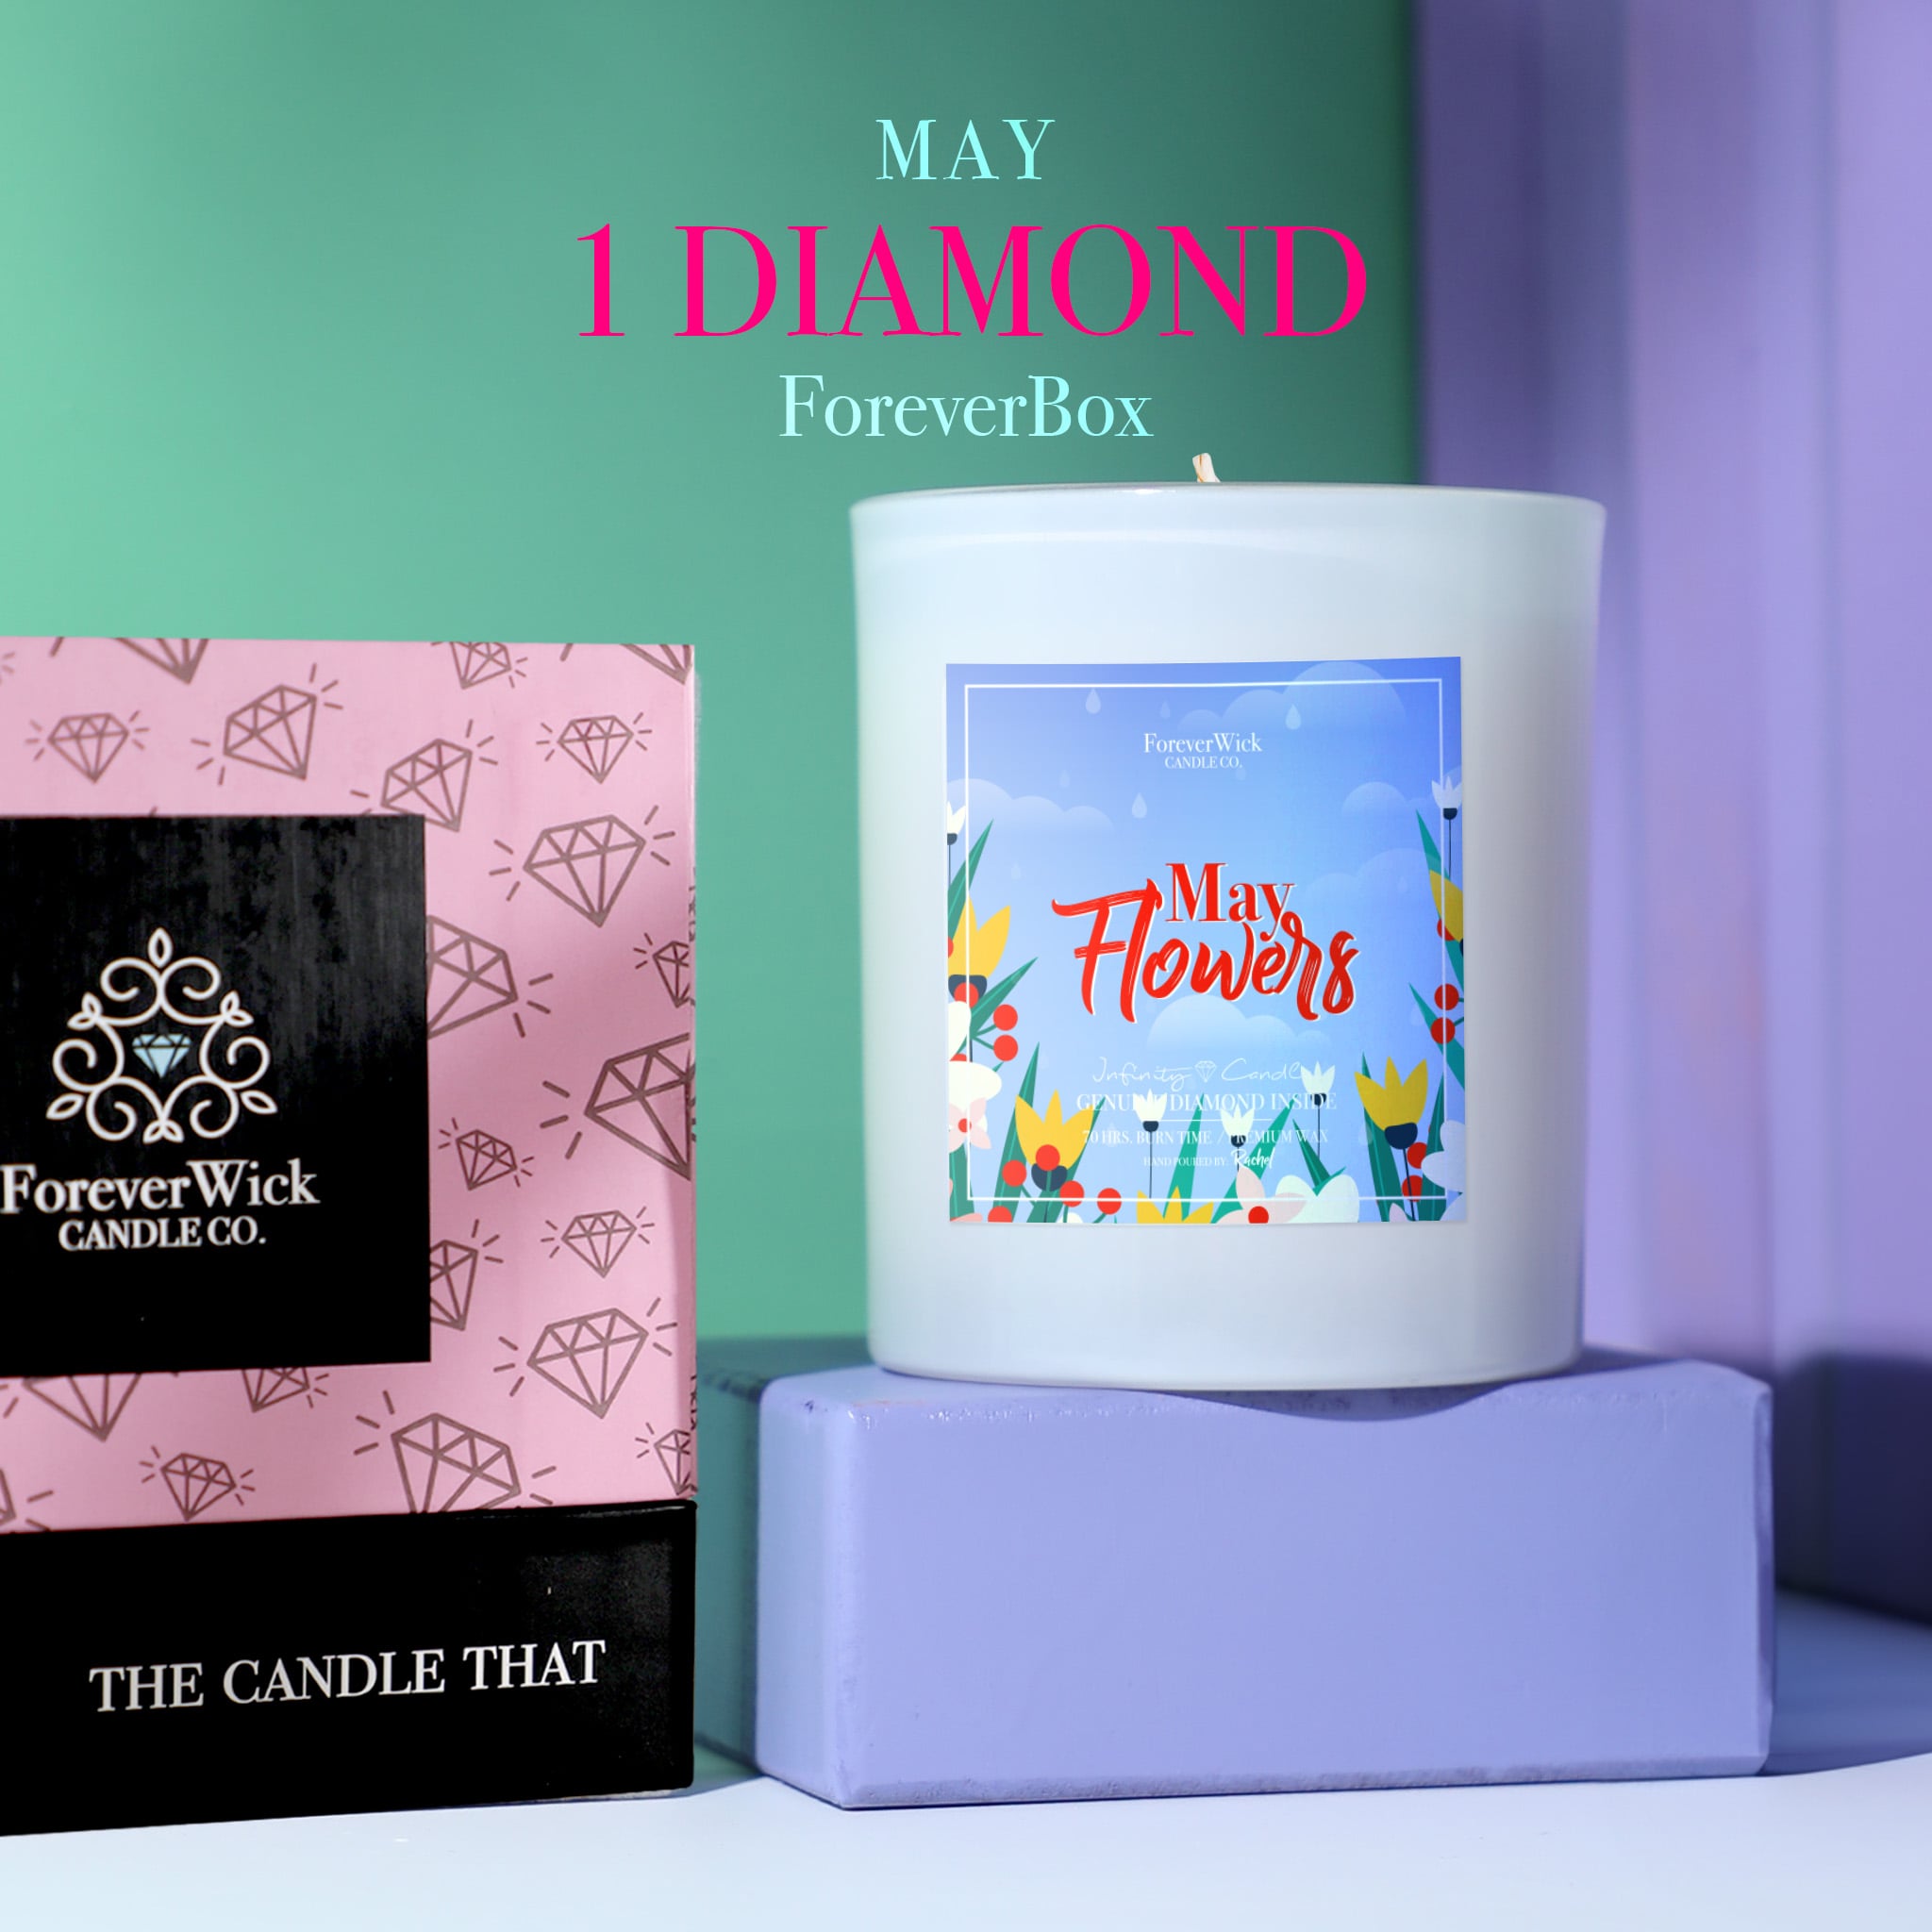 ForeverBox: 1 Diamond Candle